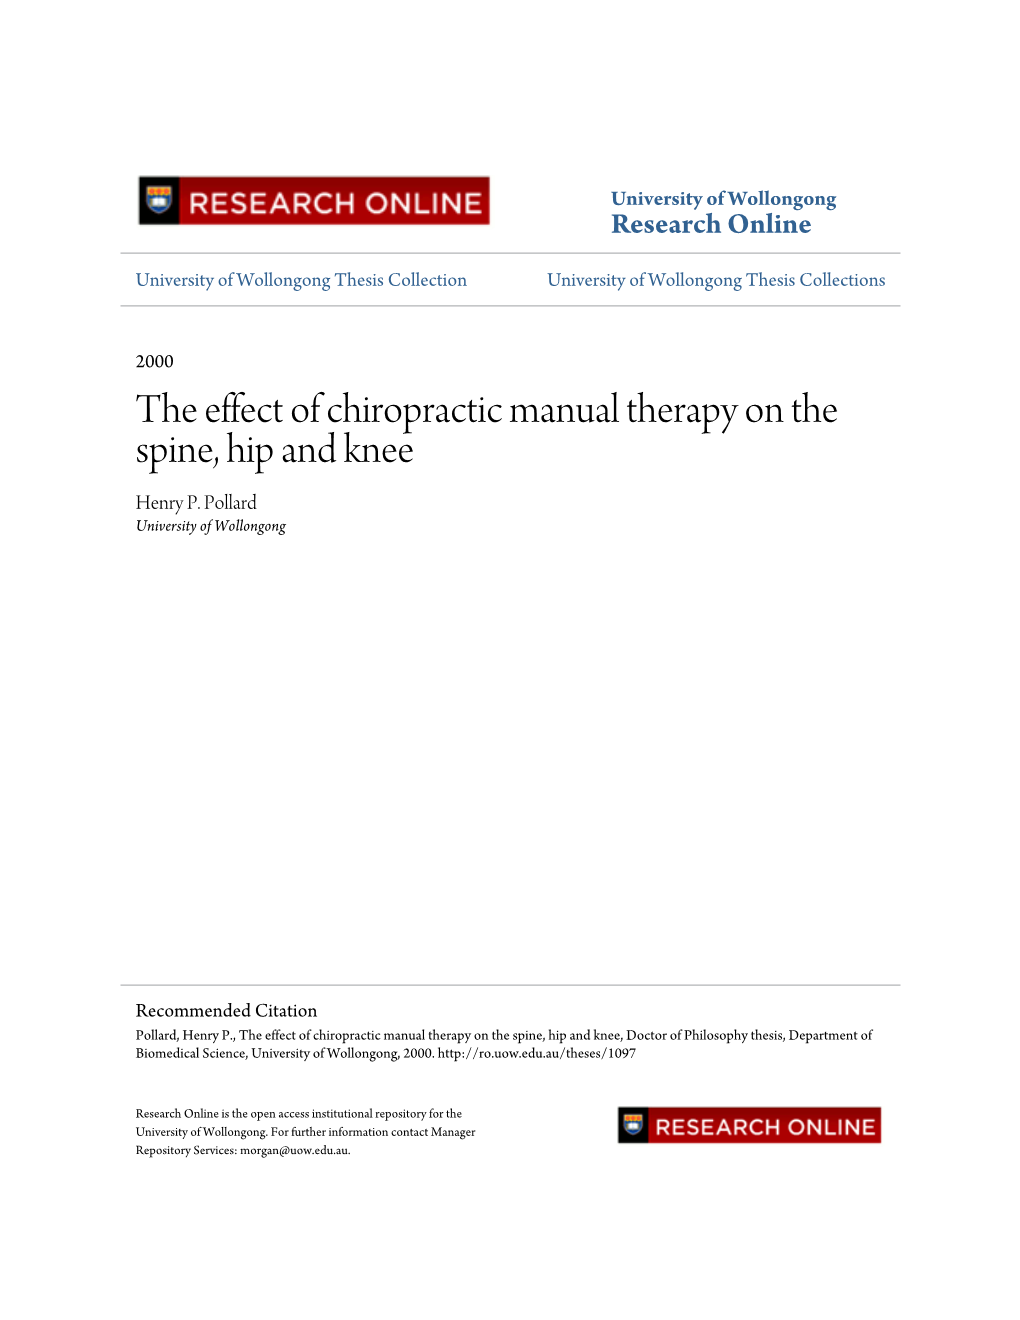 The Effect of Chiropractic Manual Therapy on the Spine, Hip and Knee Henry P